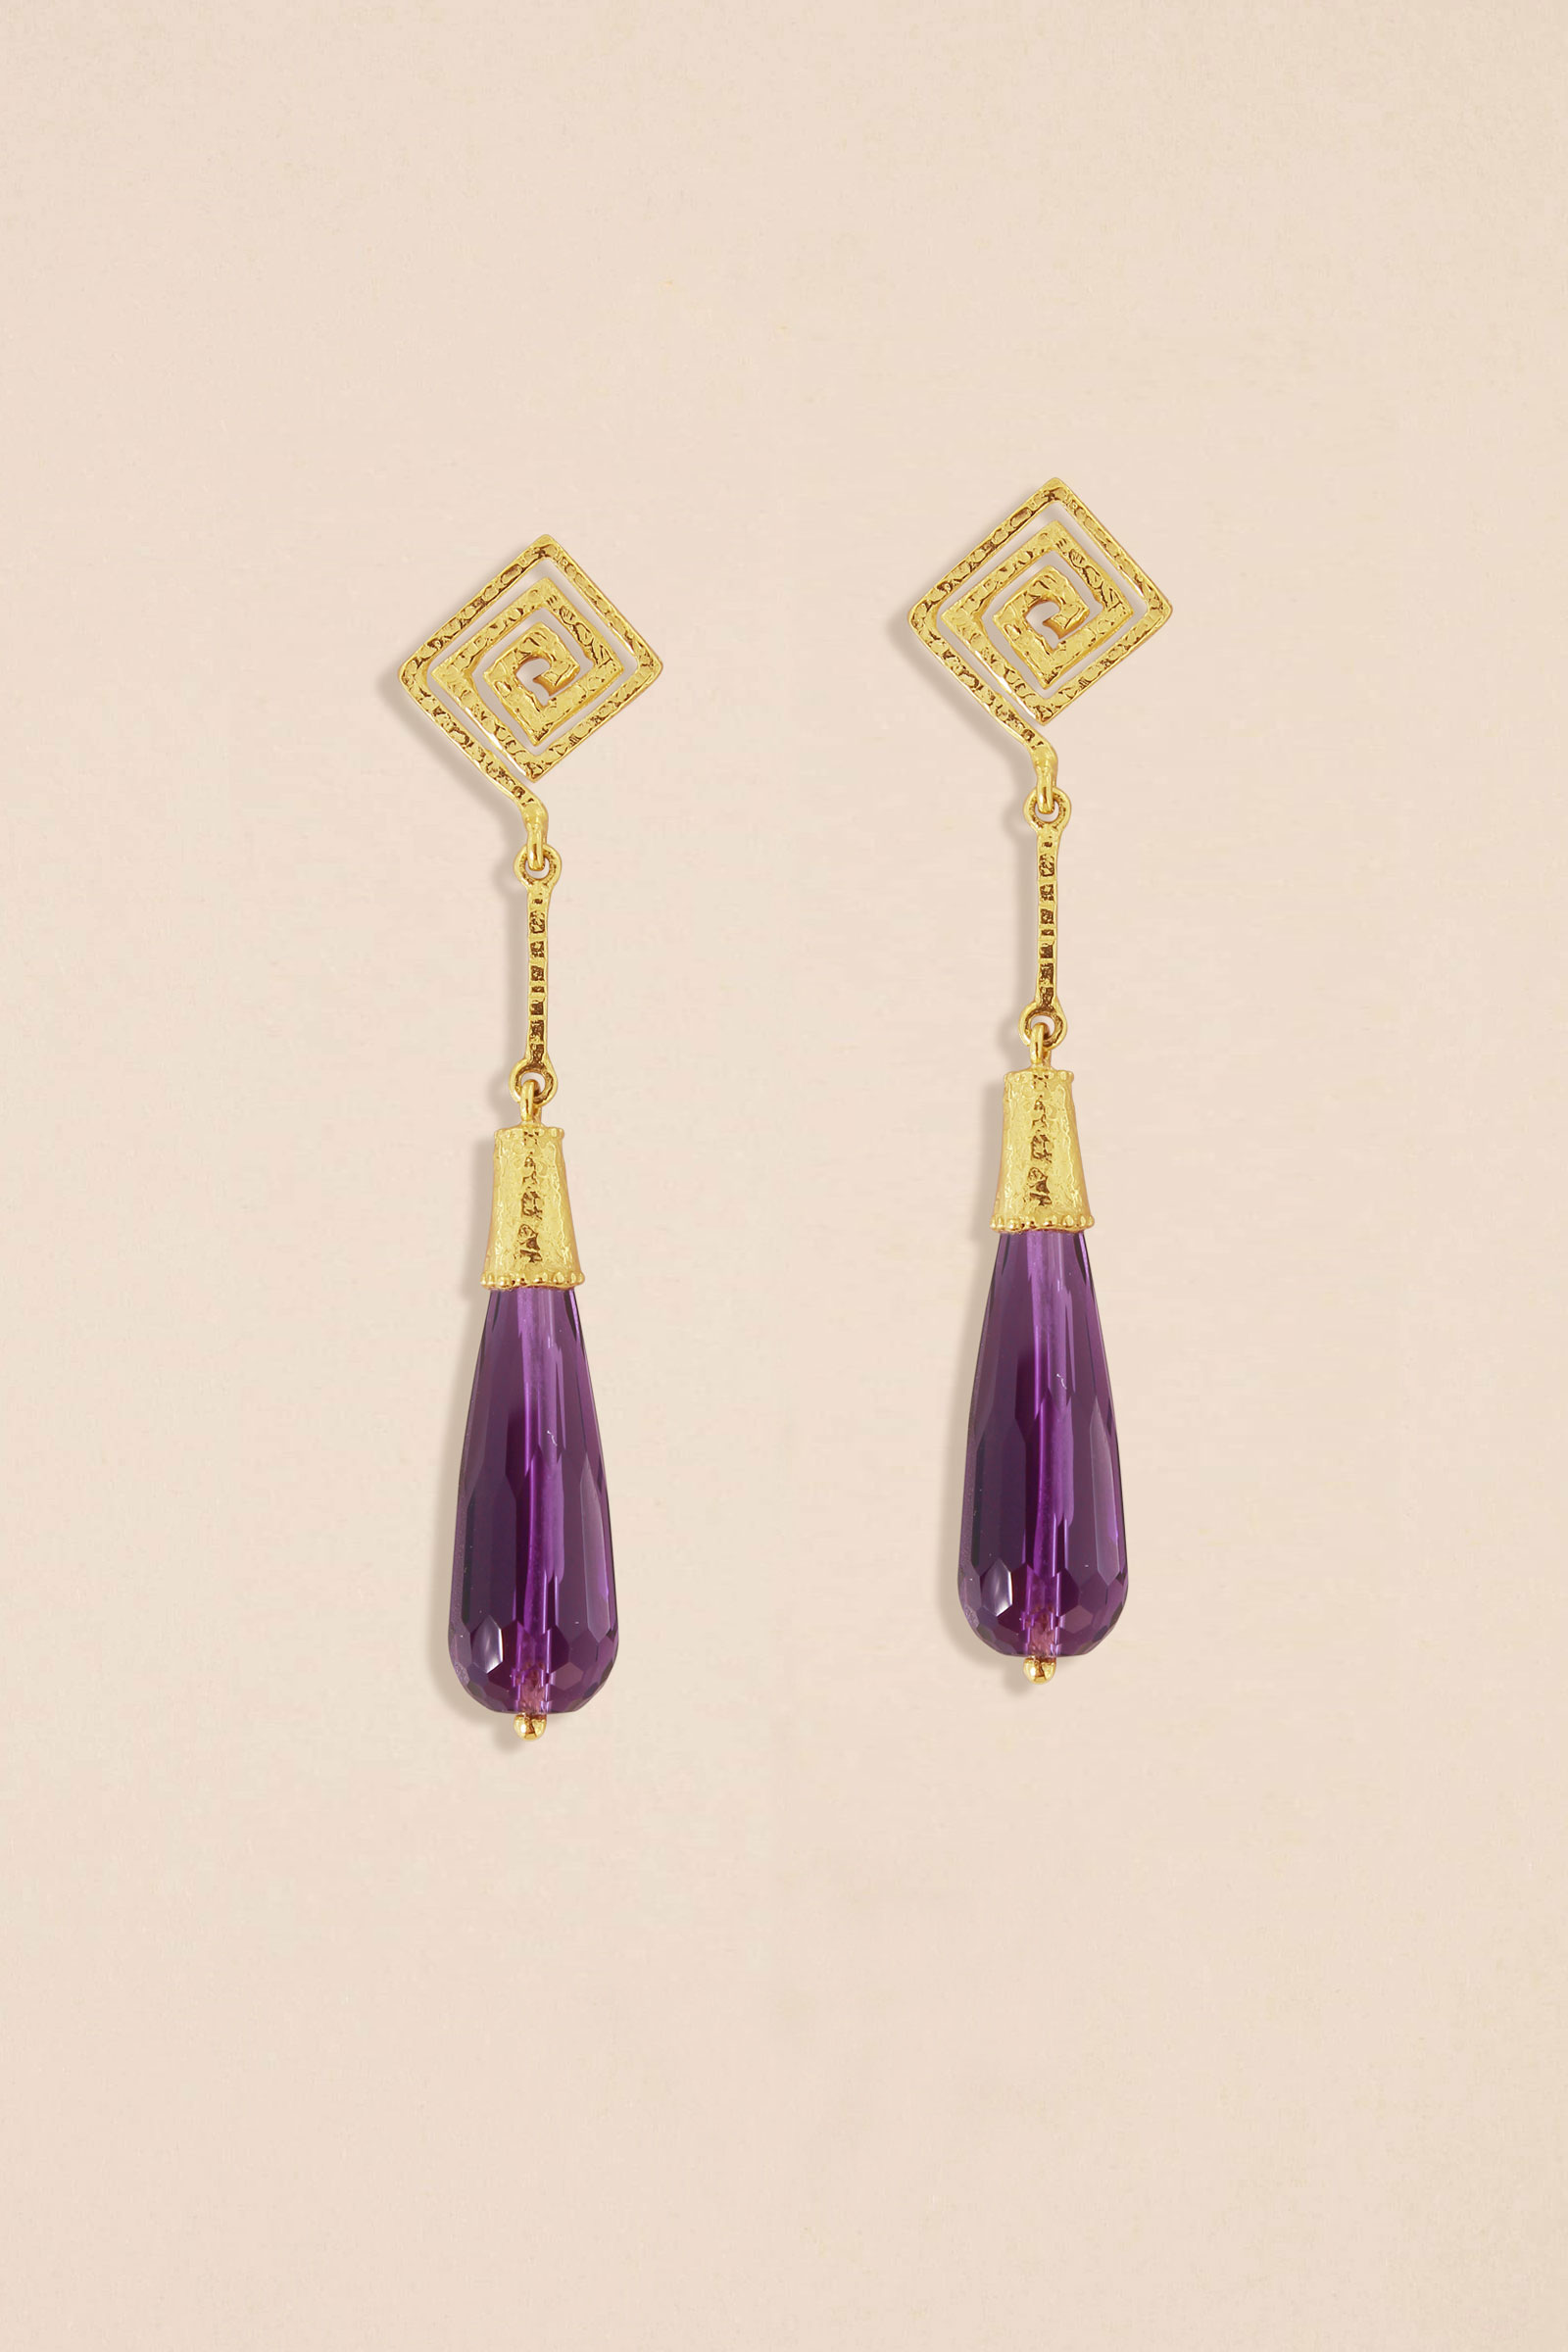 SD271B-18-Kt-Yellow-Gold-Pendant-Earrings-with-Purple-Amethyst-1